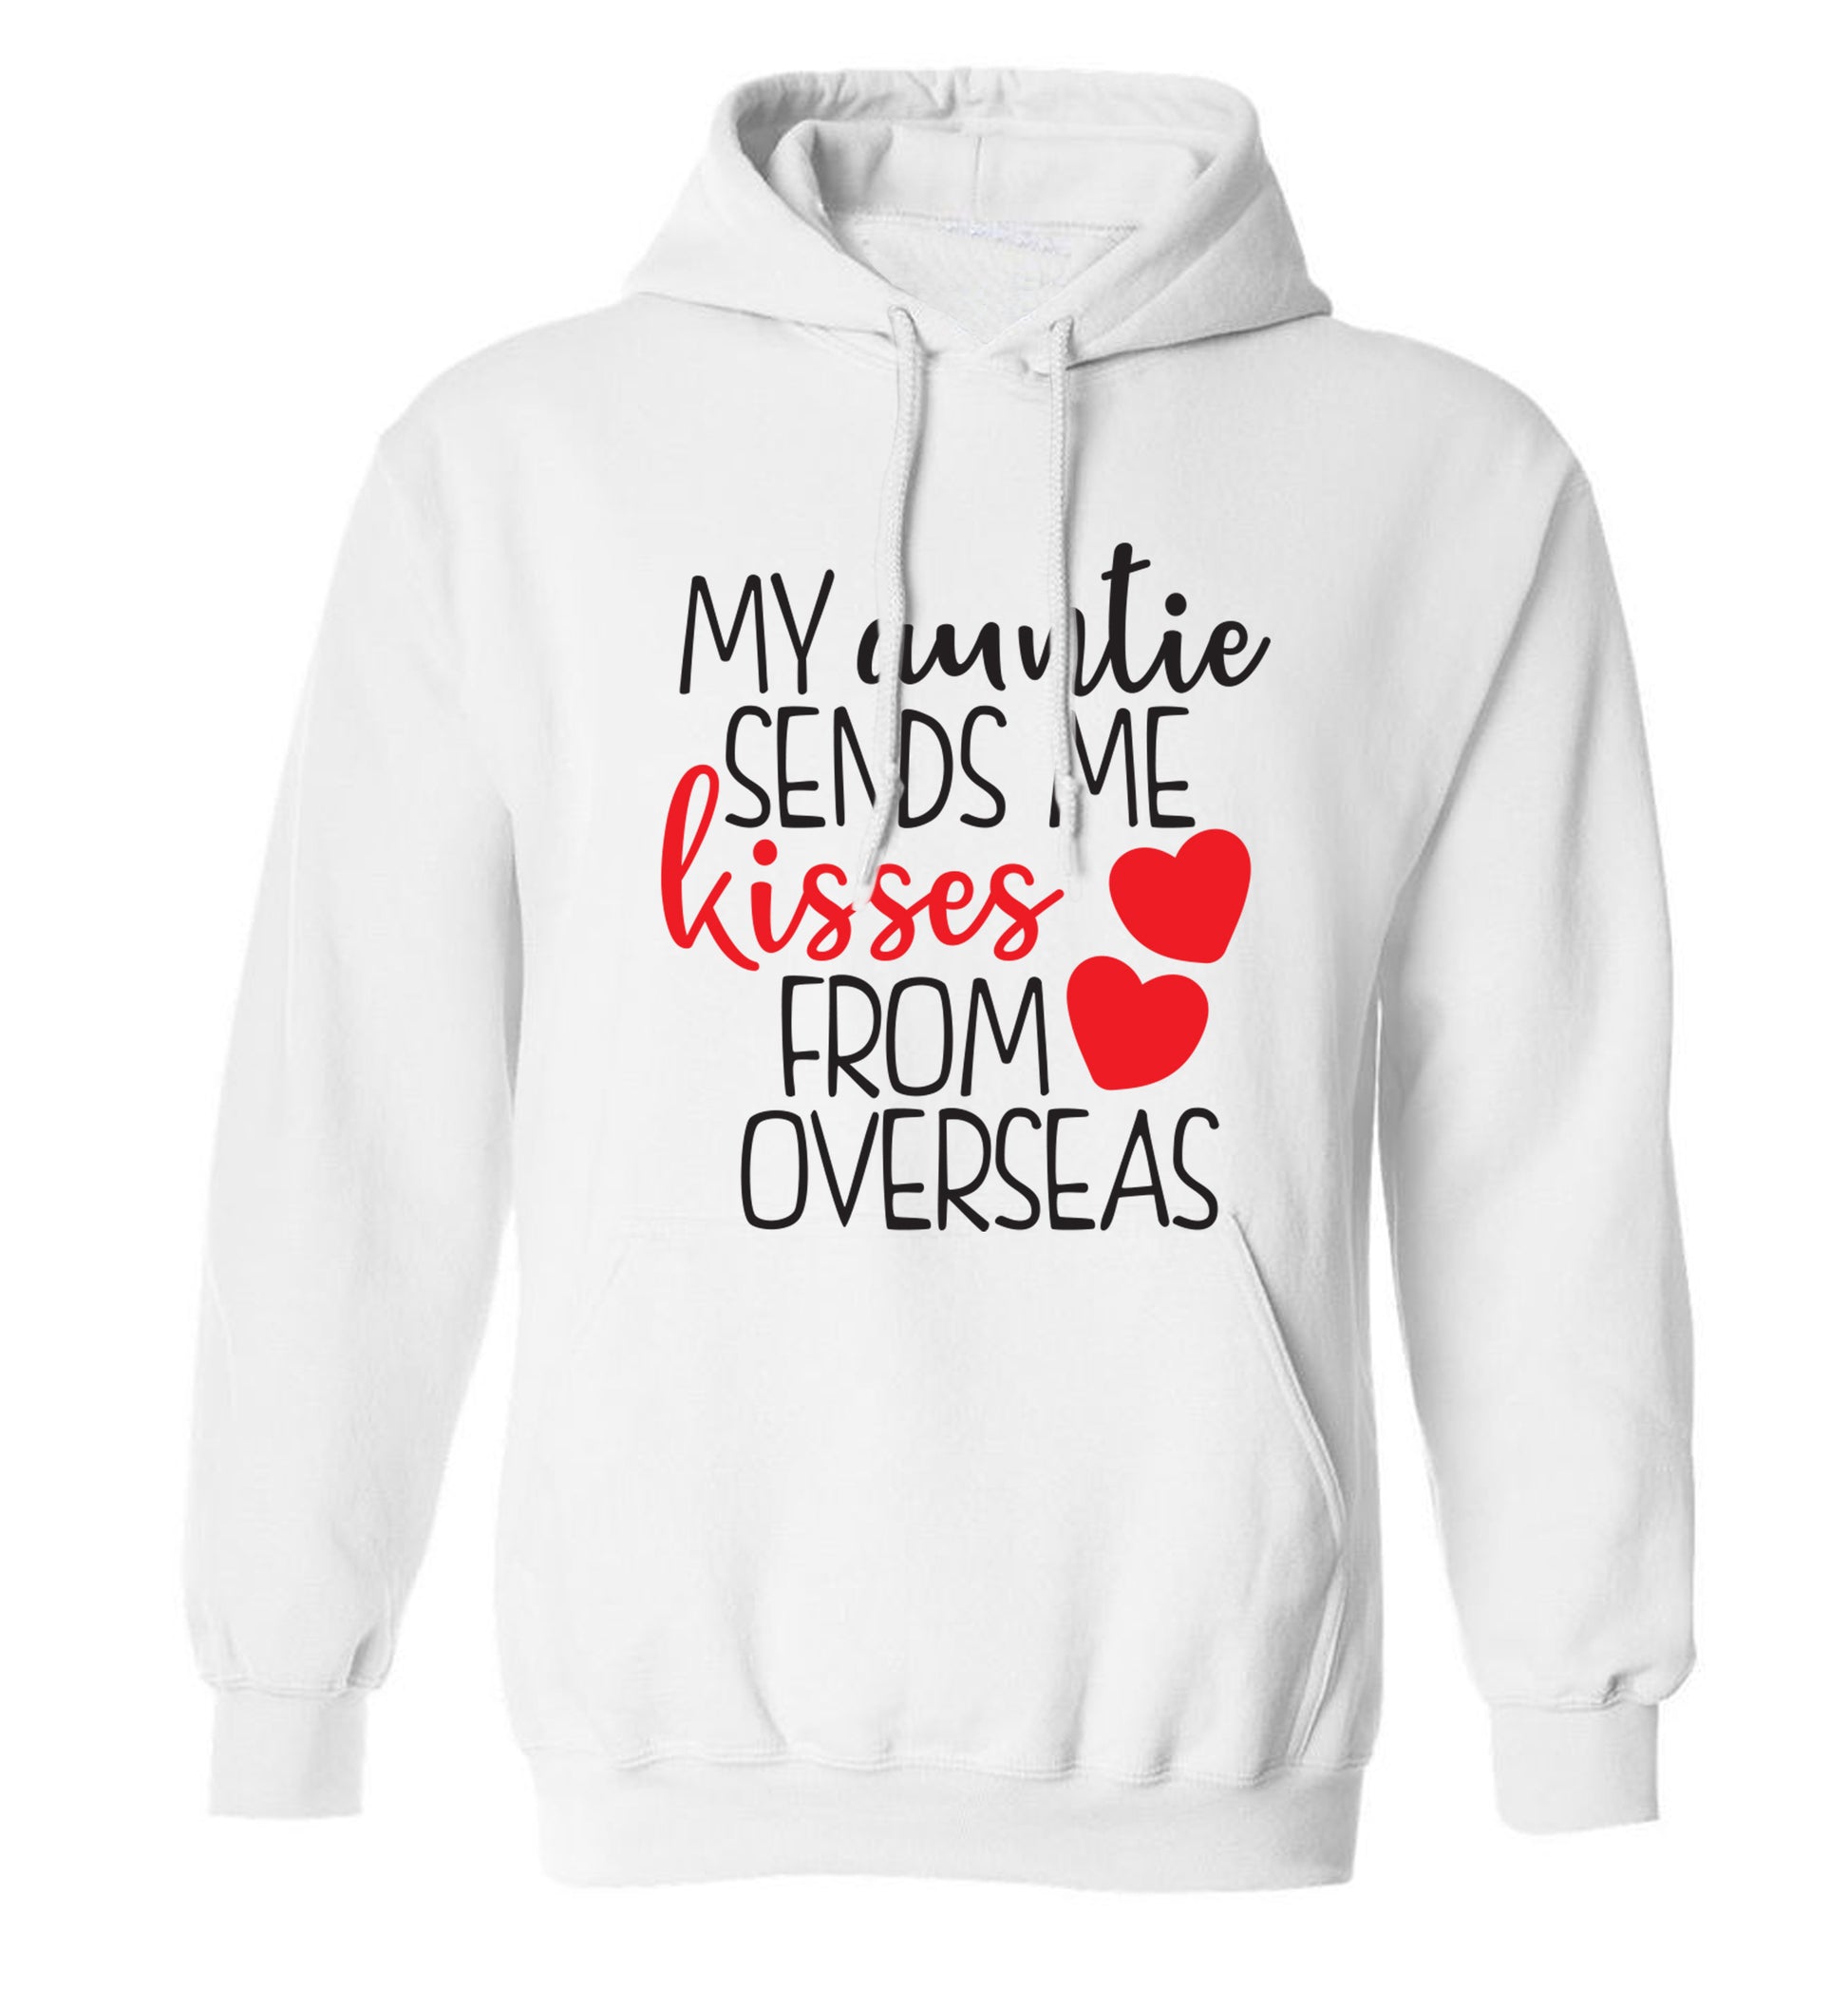 My auntie sends me kisses from overseas adults unisex white hoodie 2XL